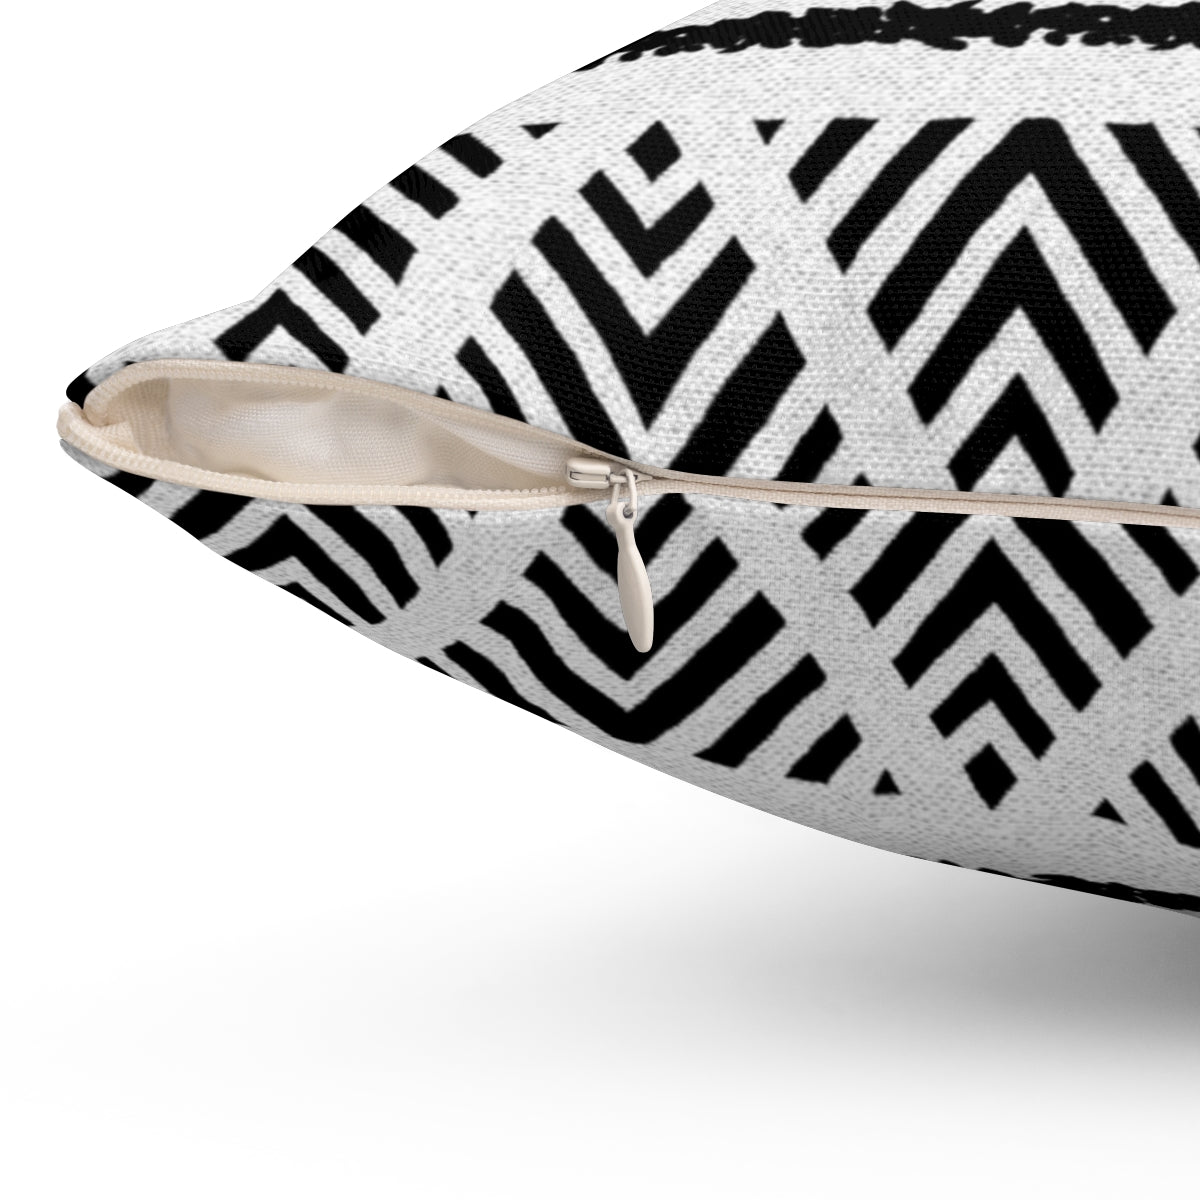 Mudcloth Print Black and White Colored Cushion Sleeve